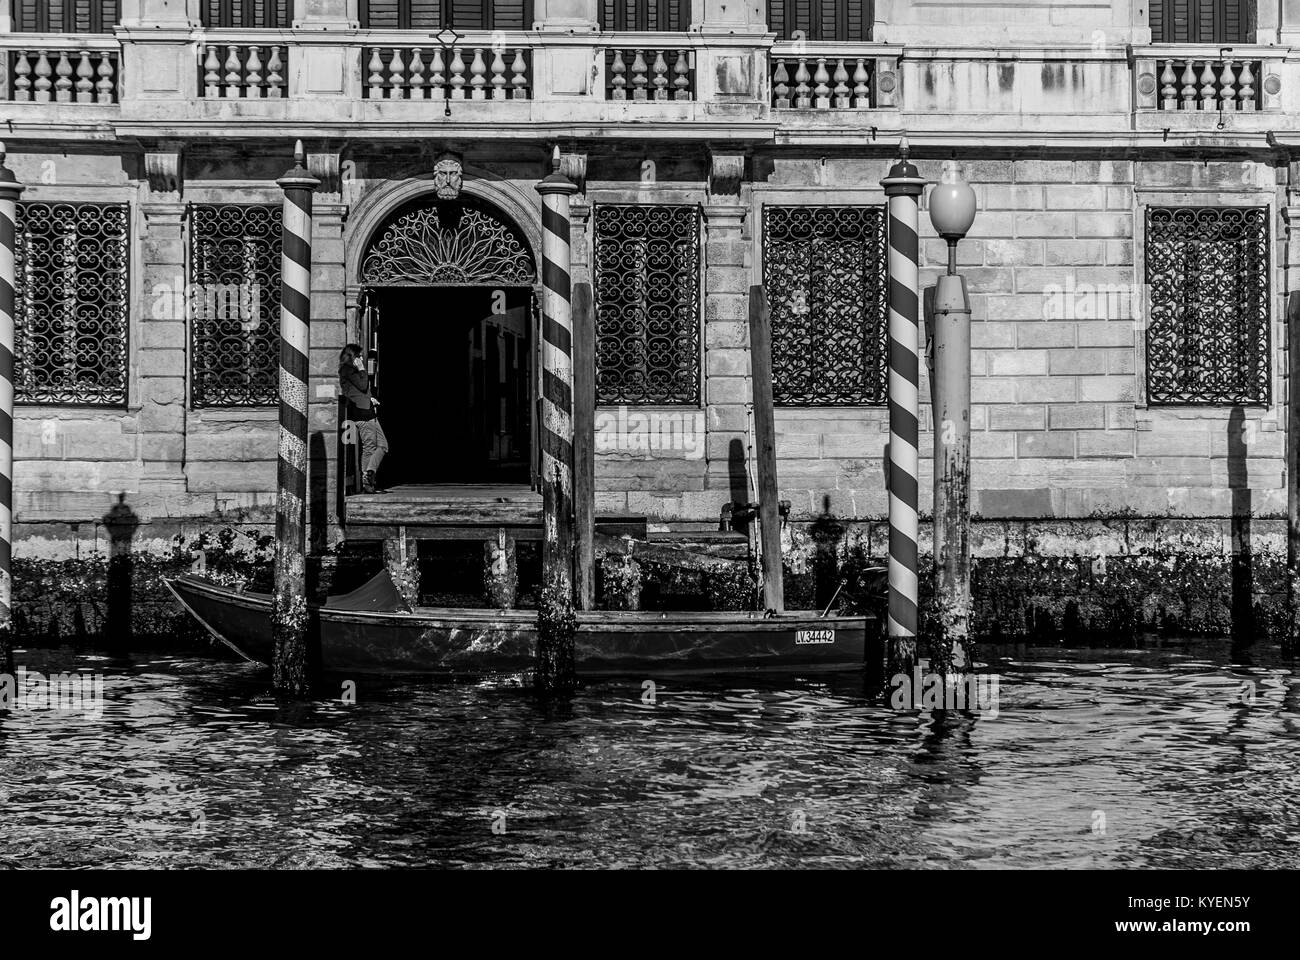 VENICE-MARCH 9:a boat in front the main entrance of an old building while an unidentified woman talks at the phone,Venice,Italy,on March 9,2017. Stock Photo